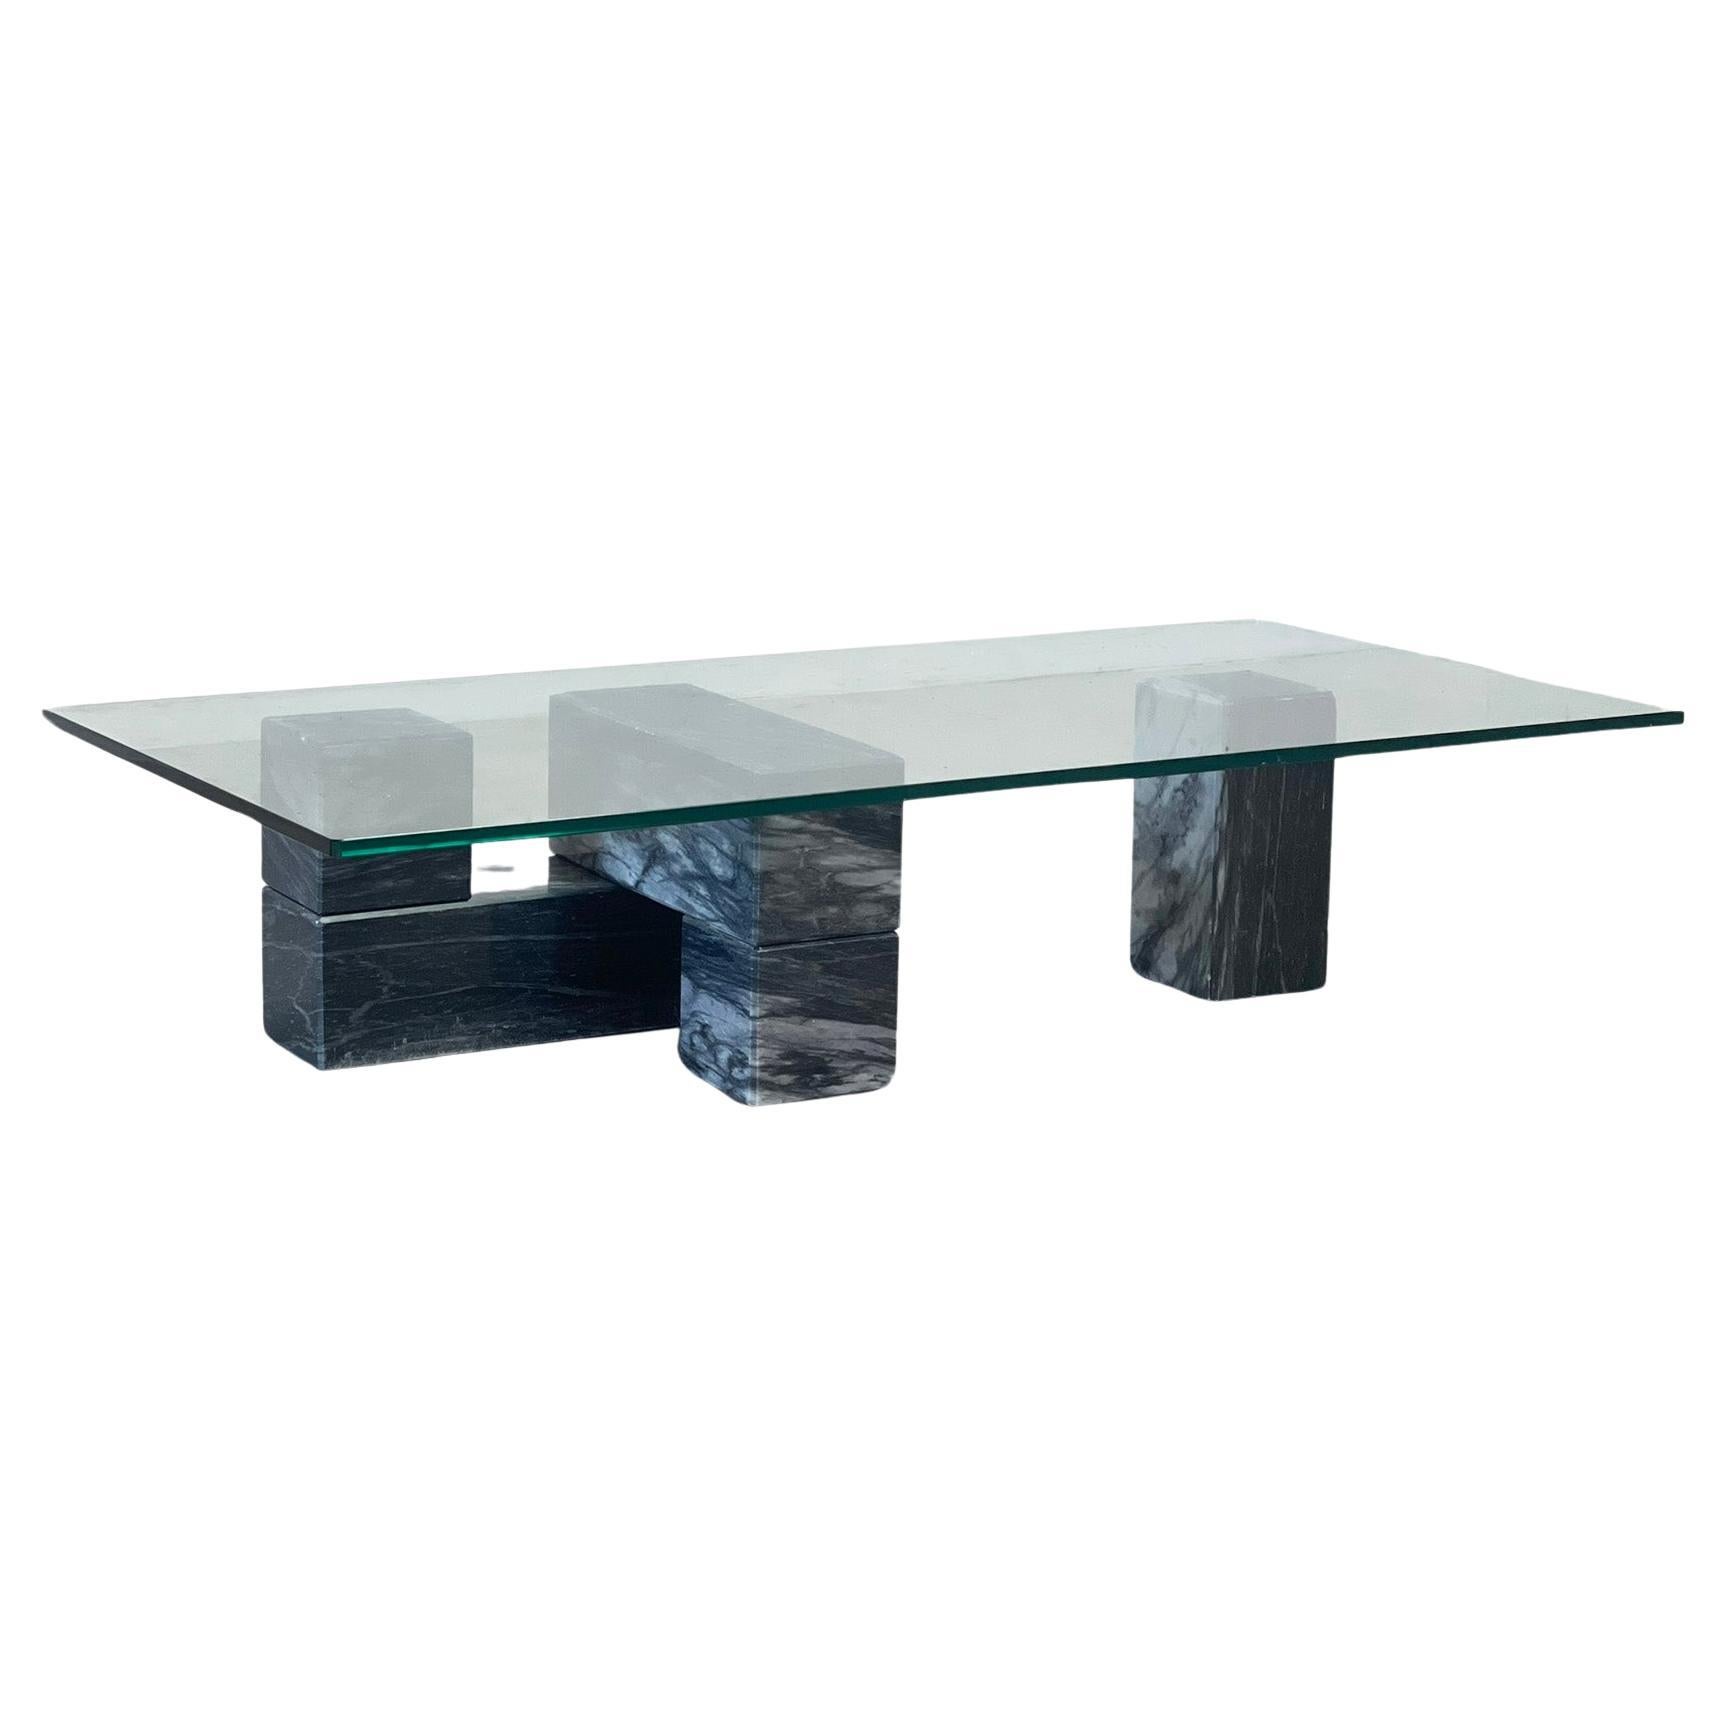 Geometric marble and glass coffee table